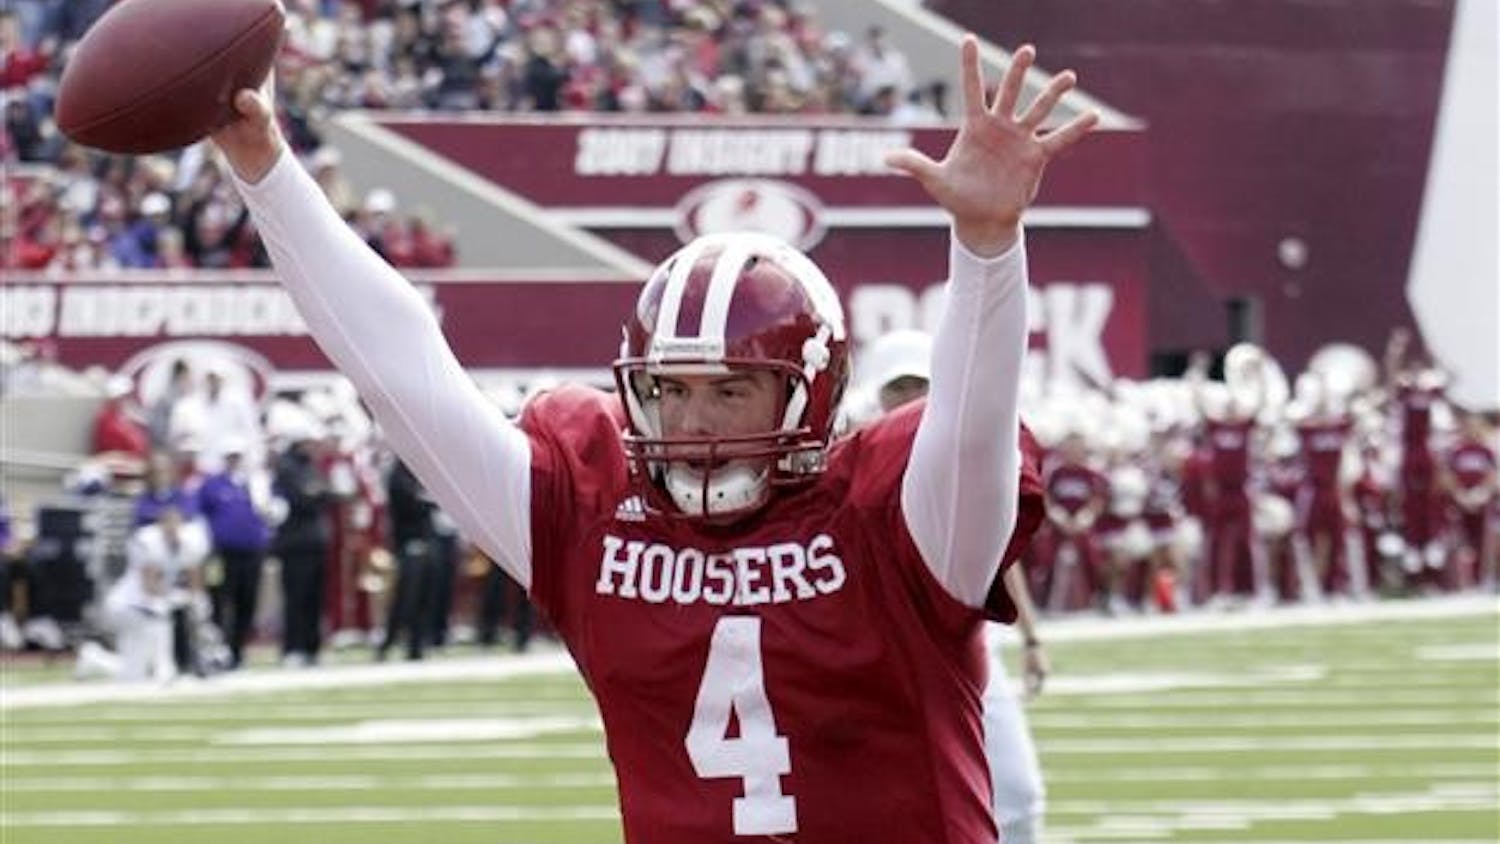 IU quarterback Ben Chappell celebrates as he scores on a 3-yard run during the first half of the Homecoming game against Northwestern on Saturday at Memorial Stadium.